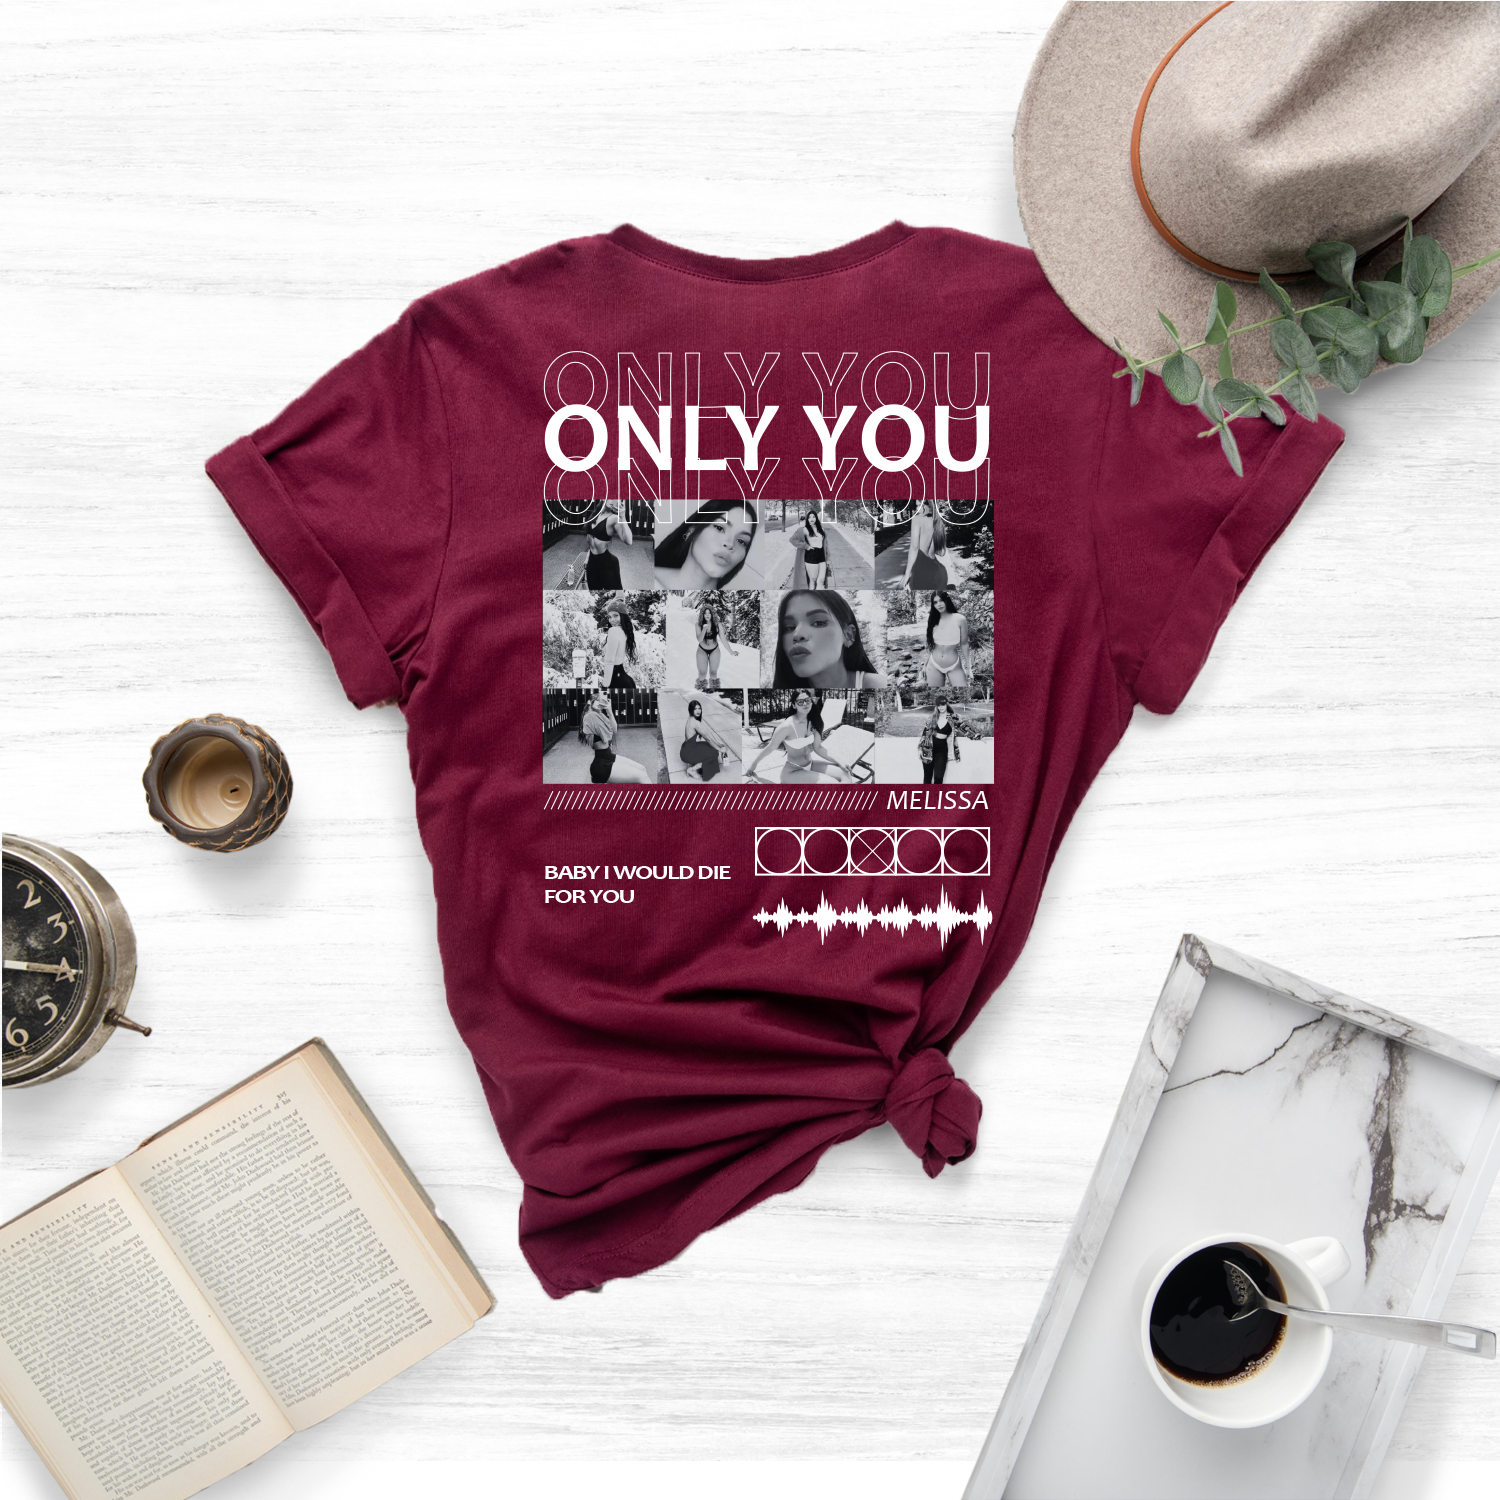 Capture and cherish your precious memories with our one-of-a-kind Only You Photo Shirt, Girlfriend Collage Shirt, the perfect gift for any occasion.